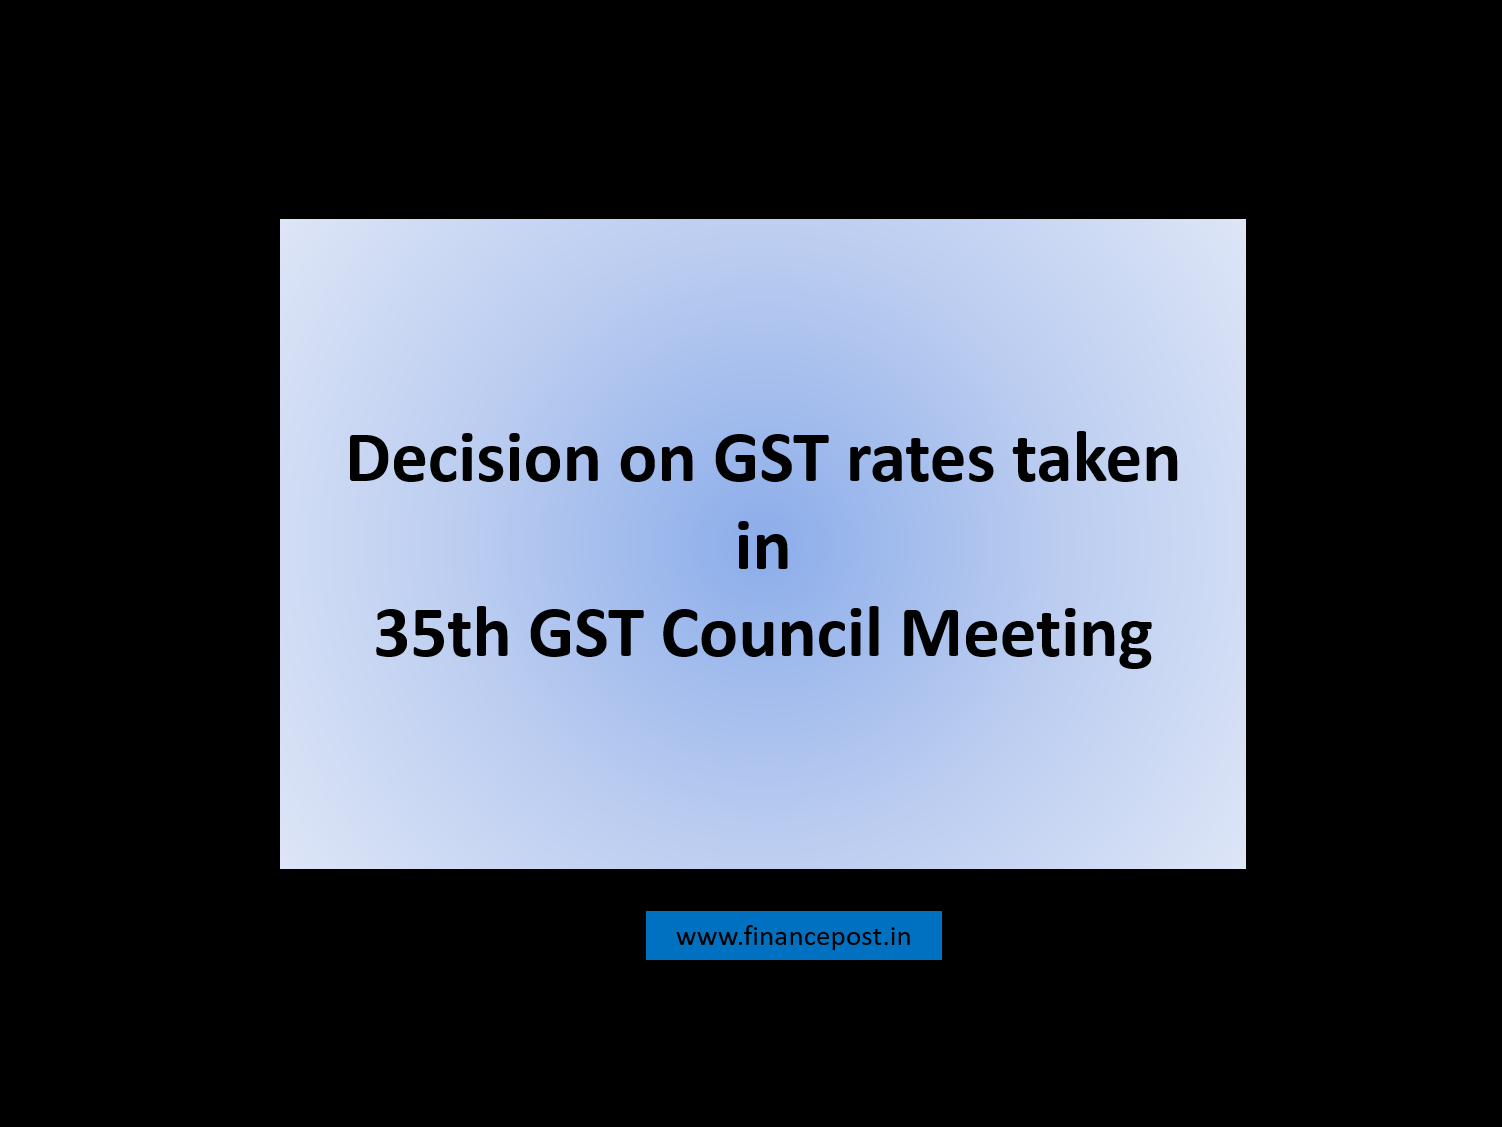 Decision on GST rates taken in 35th GST Council Meeting